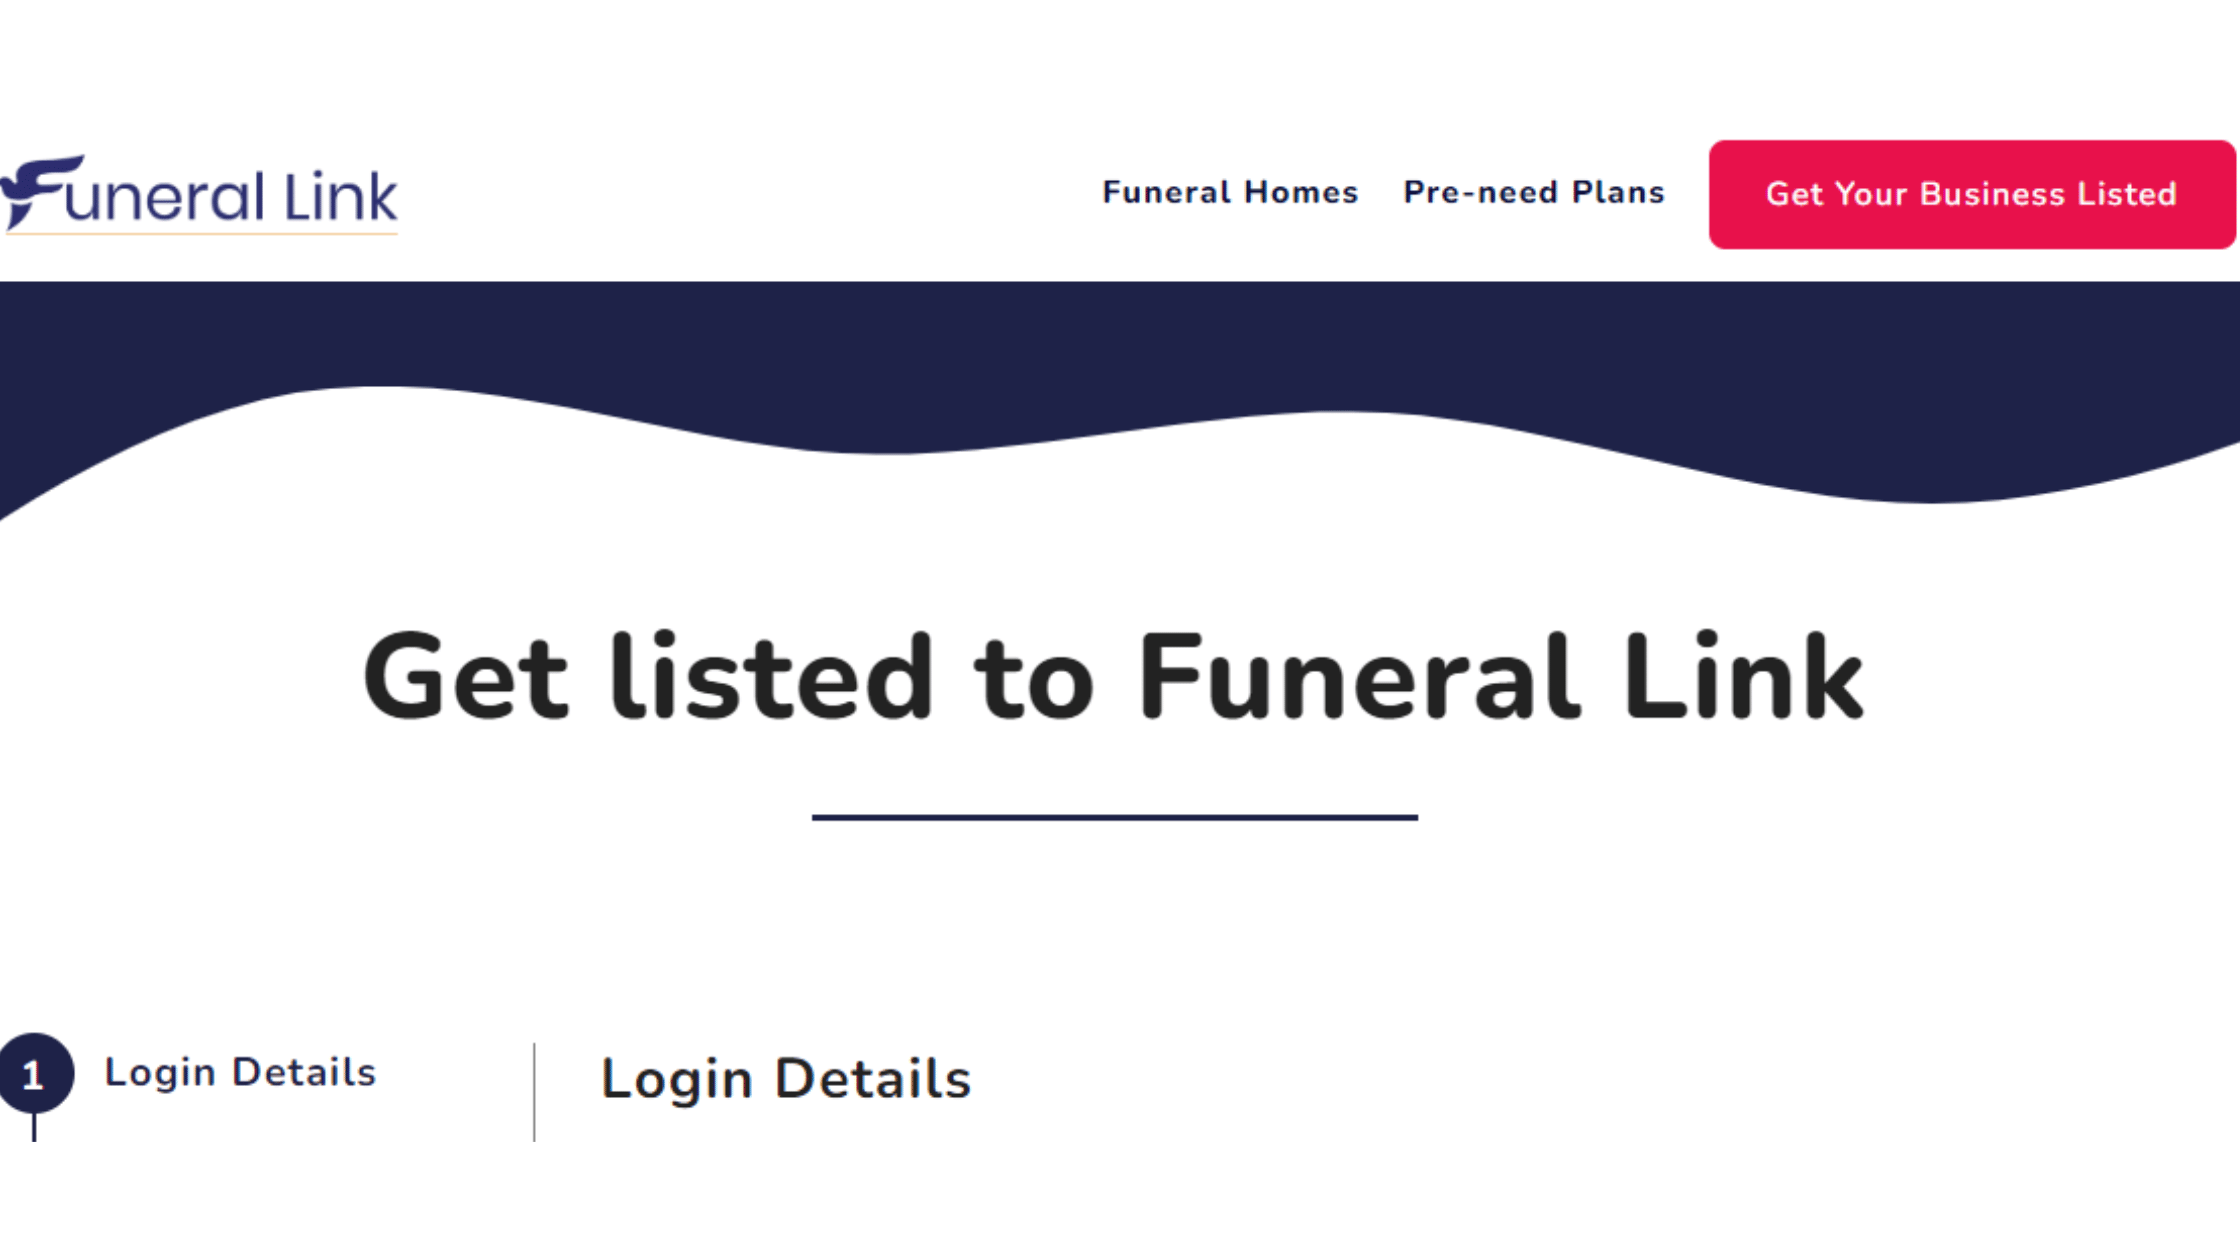 5 Reasons You Need to List Your Funeral Home Business in Funerallink